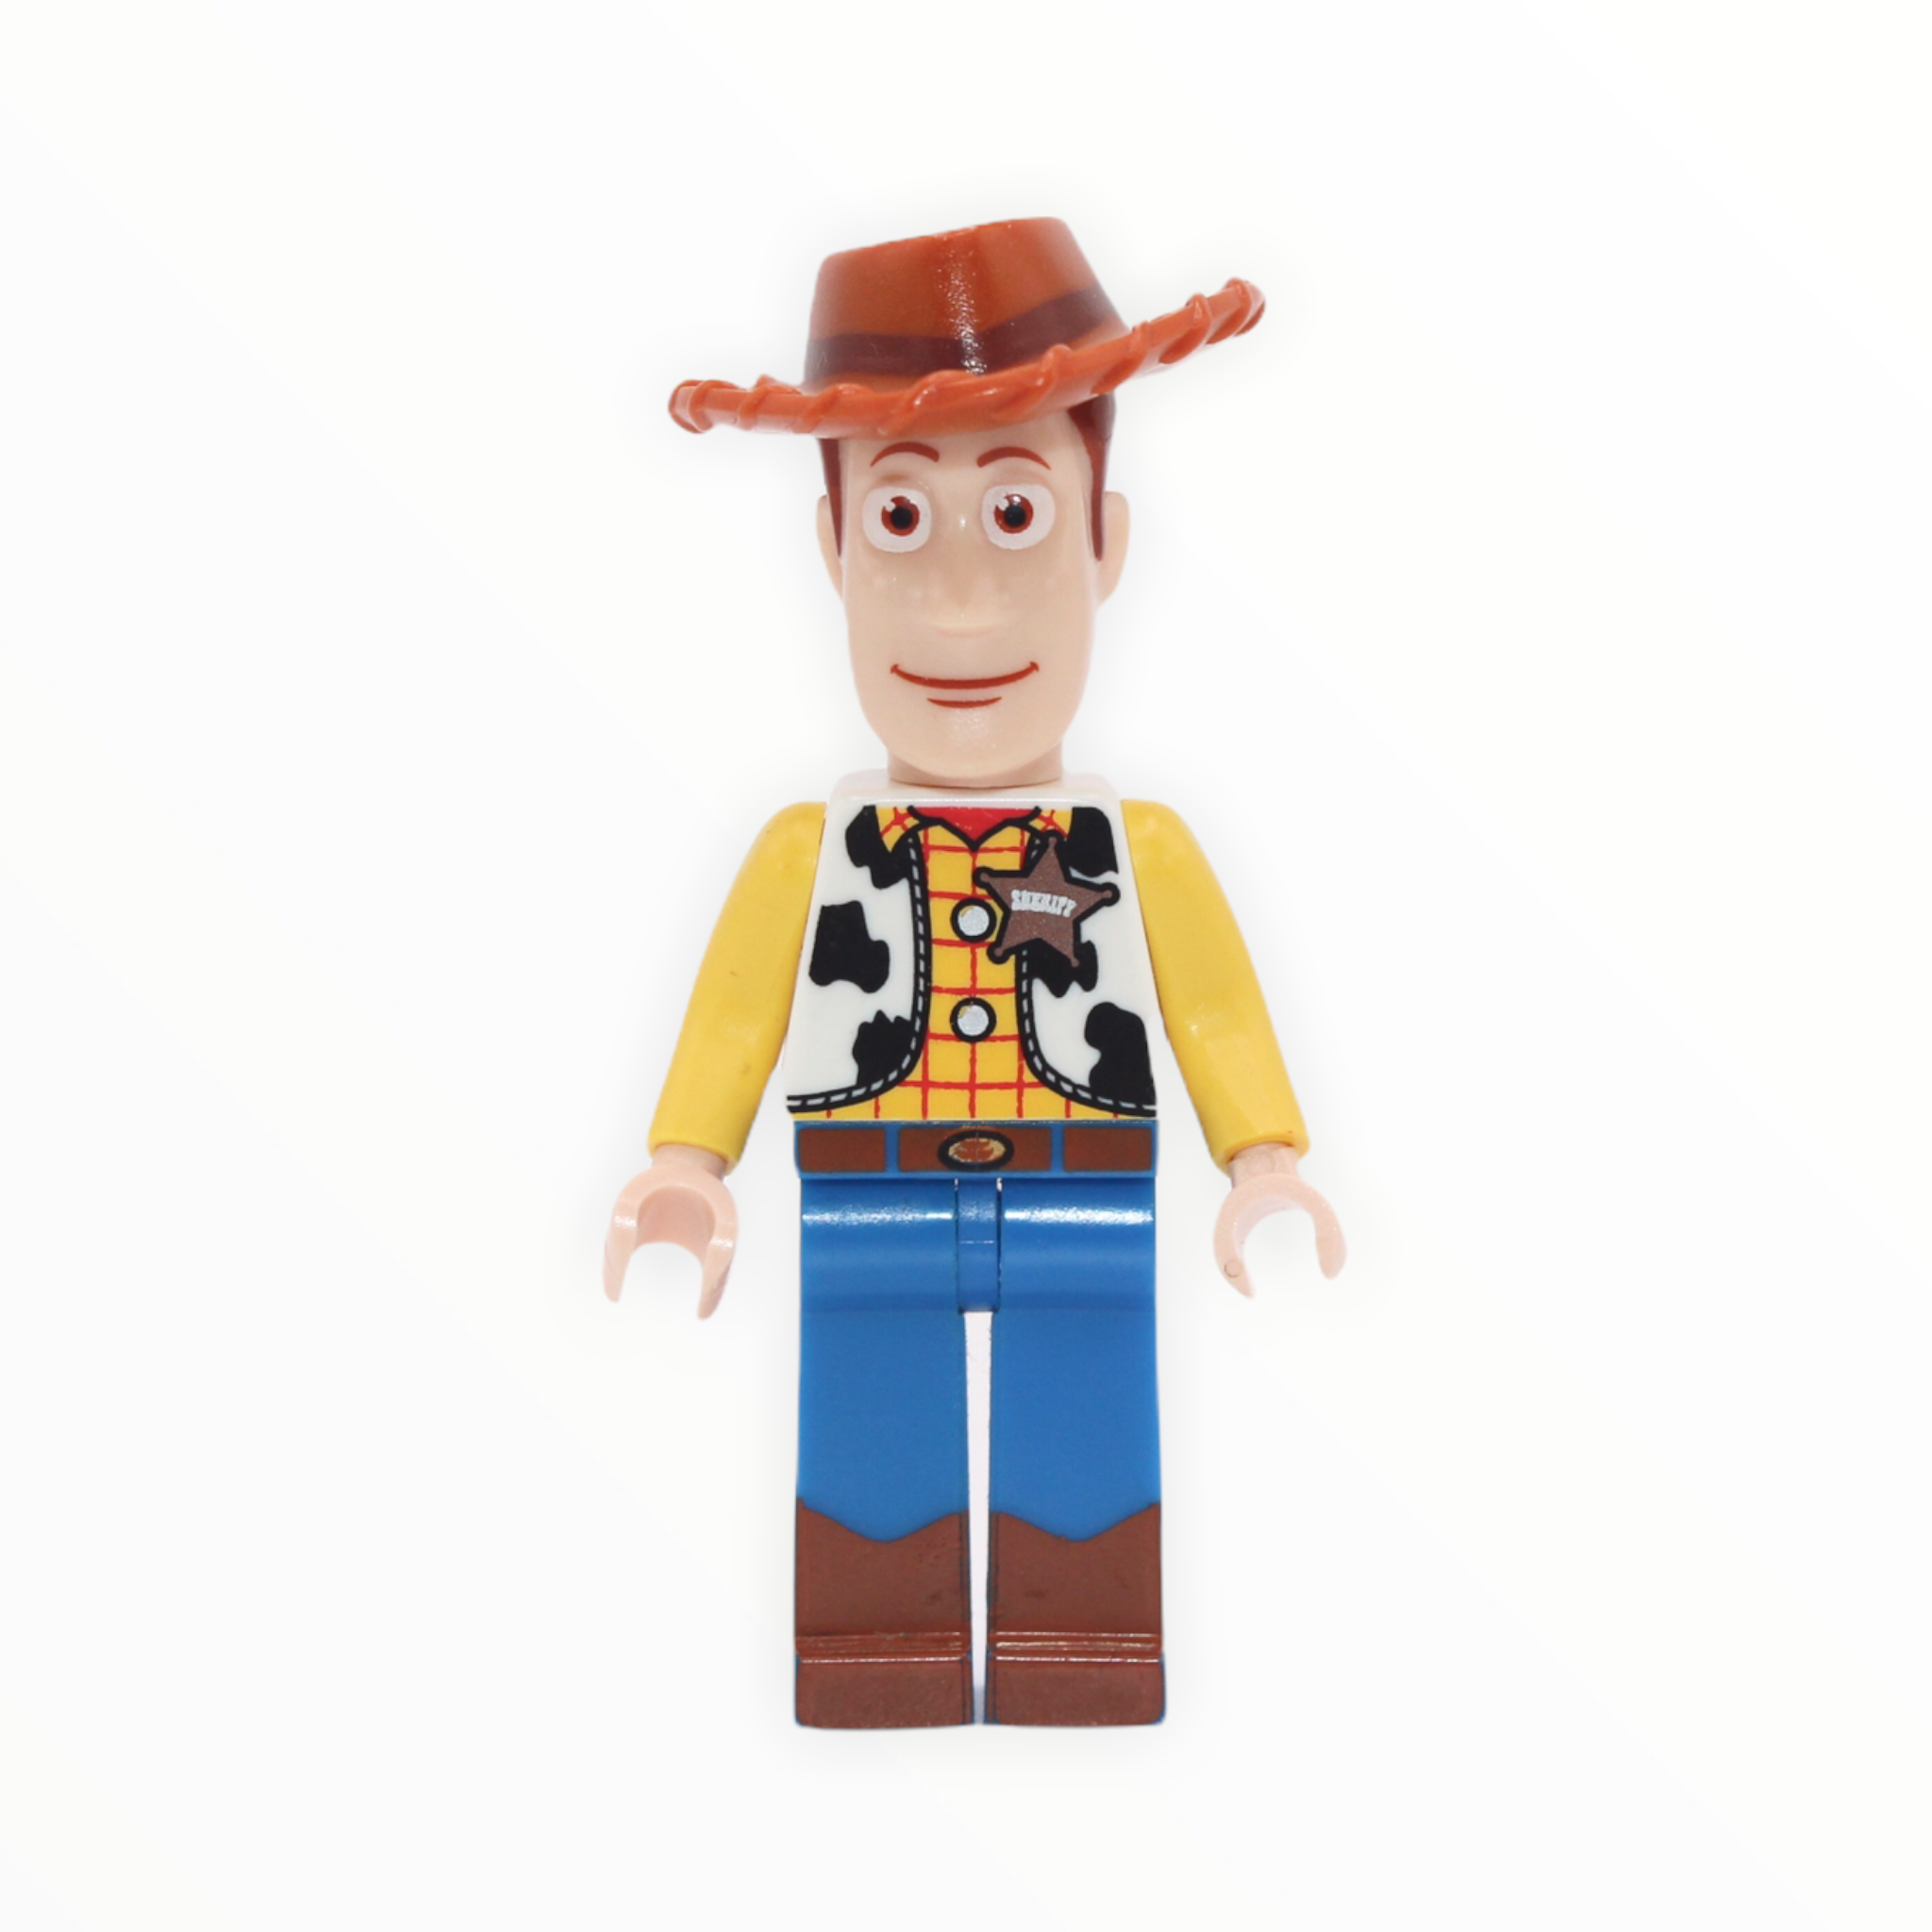 Woody (Toy Story, 2010)